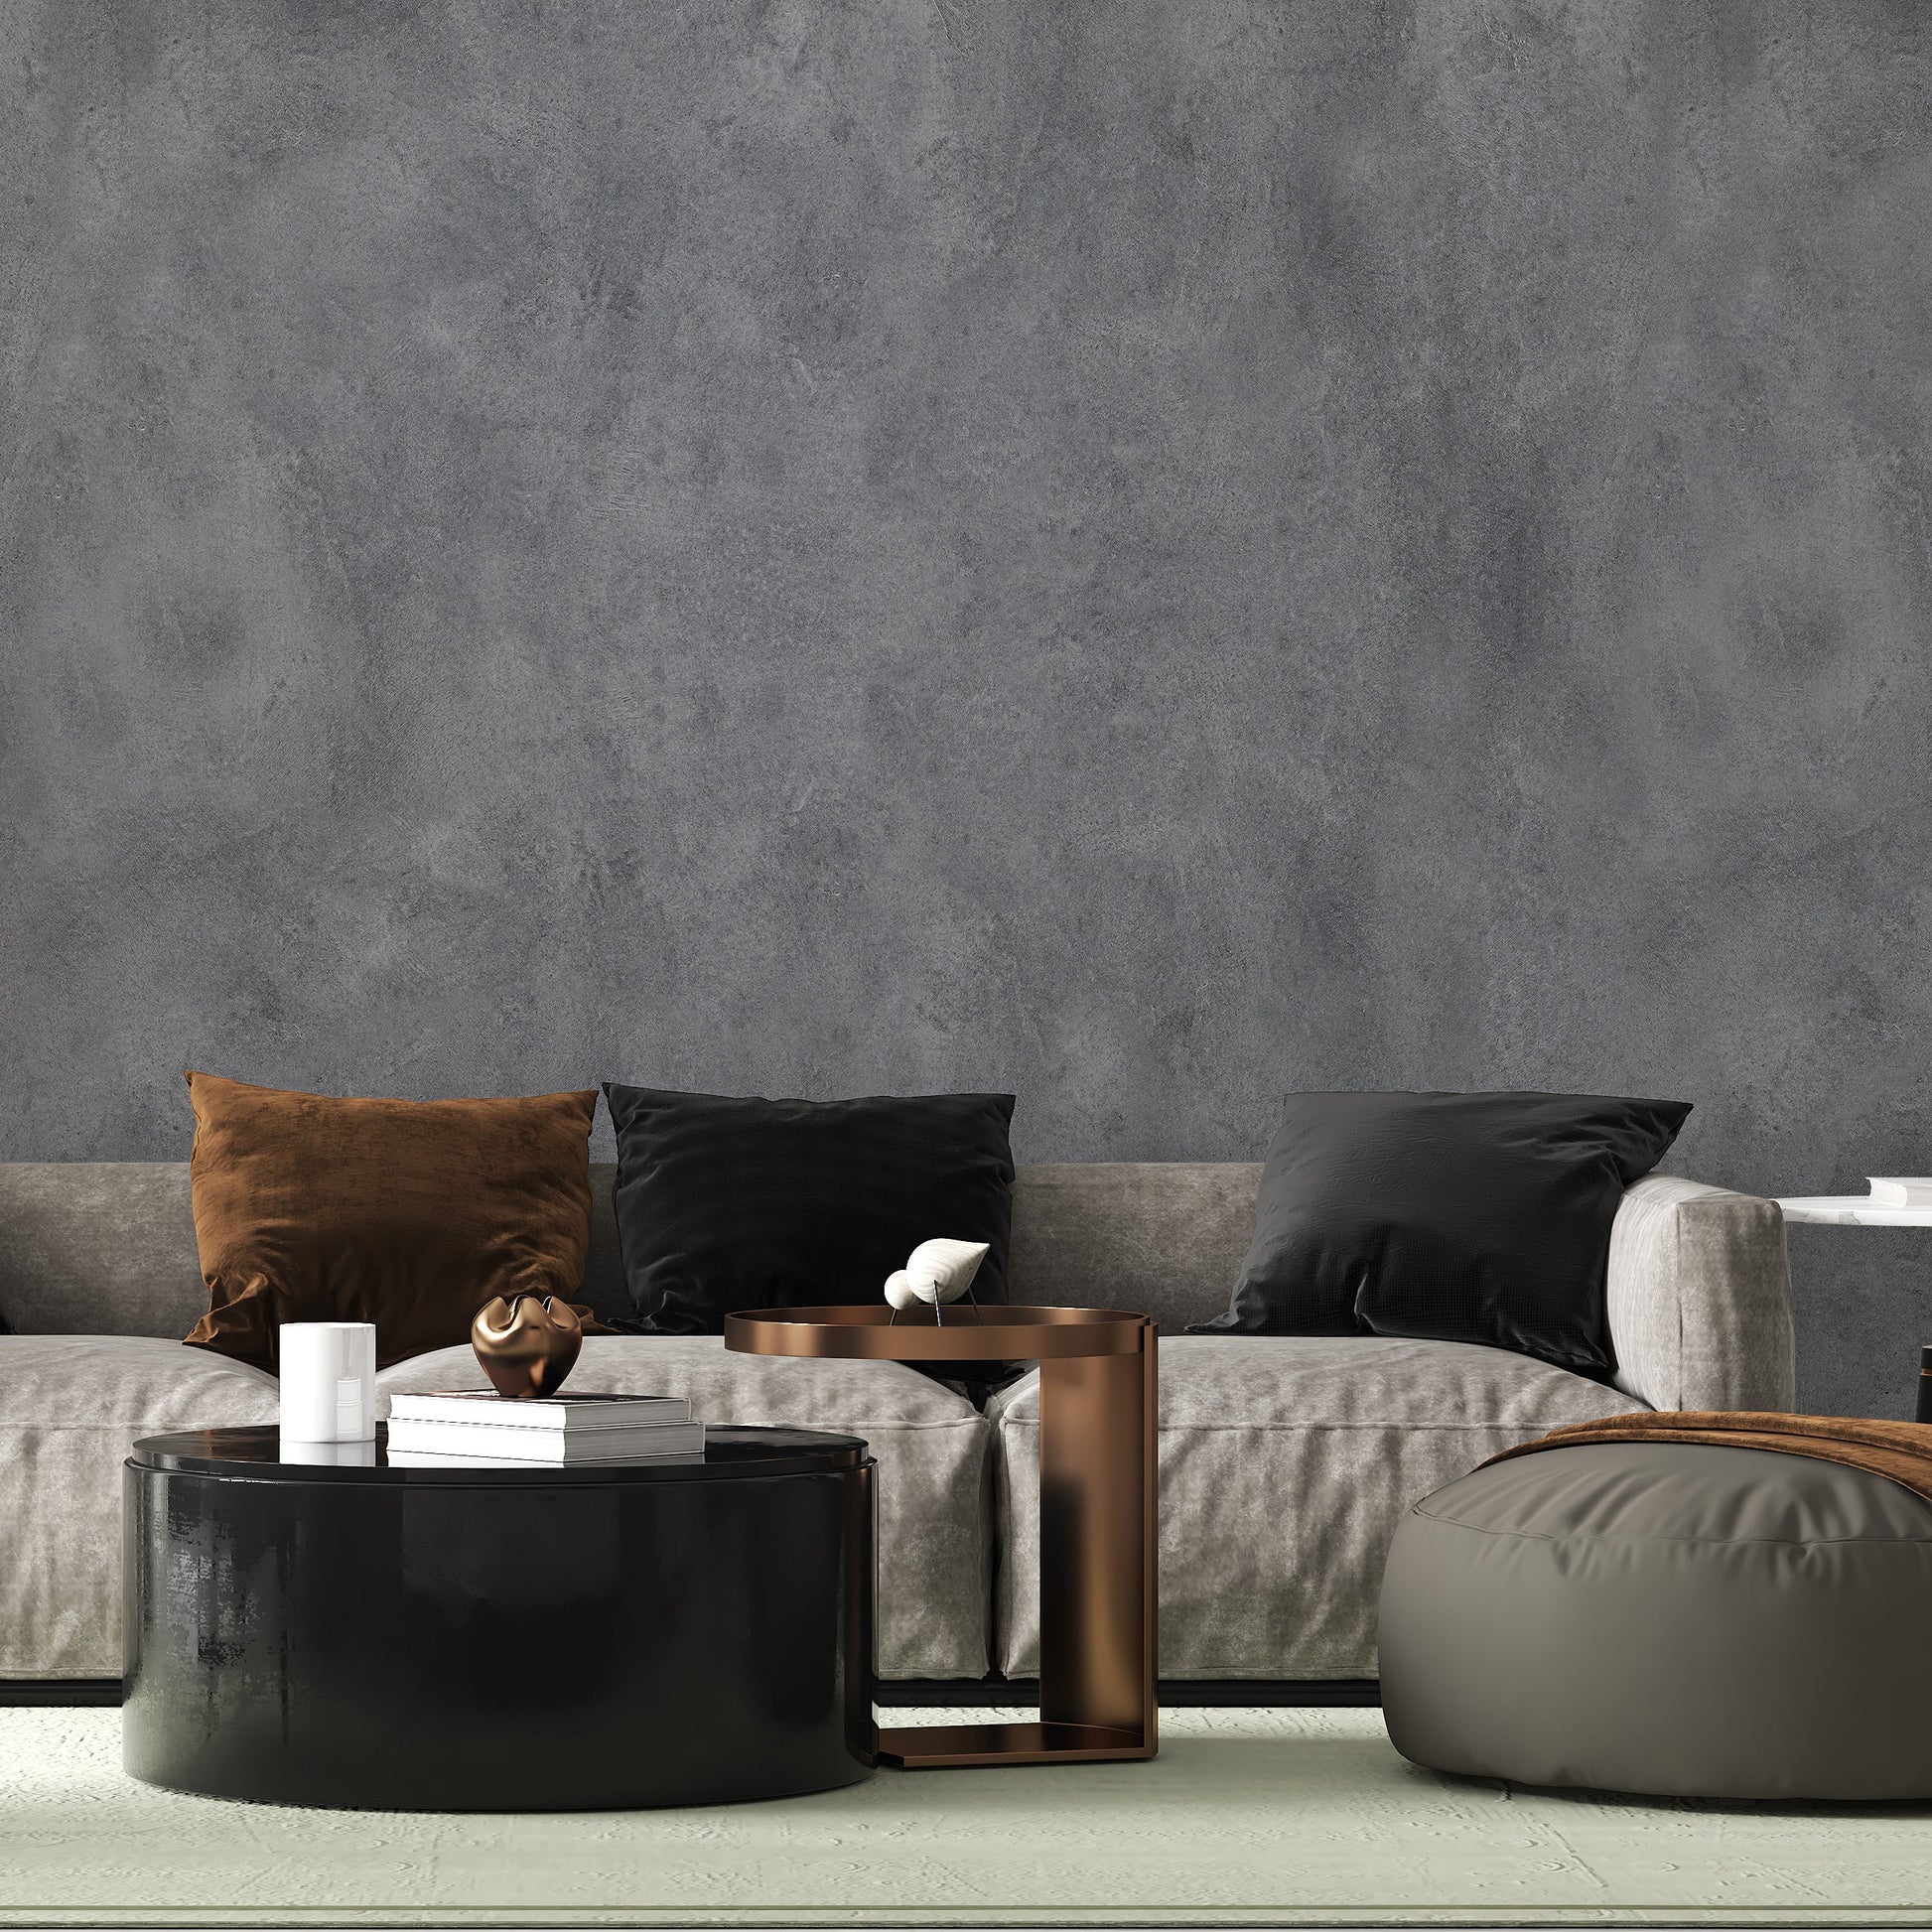 Melli Mello Be Concrete photowall living room style interior inspiration industrial feel